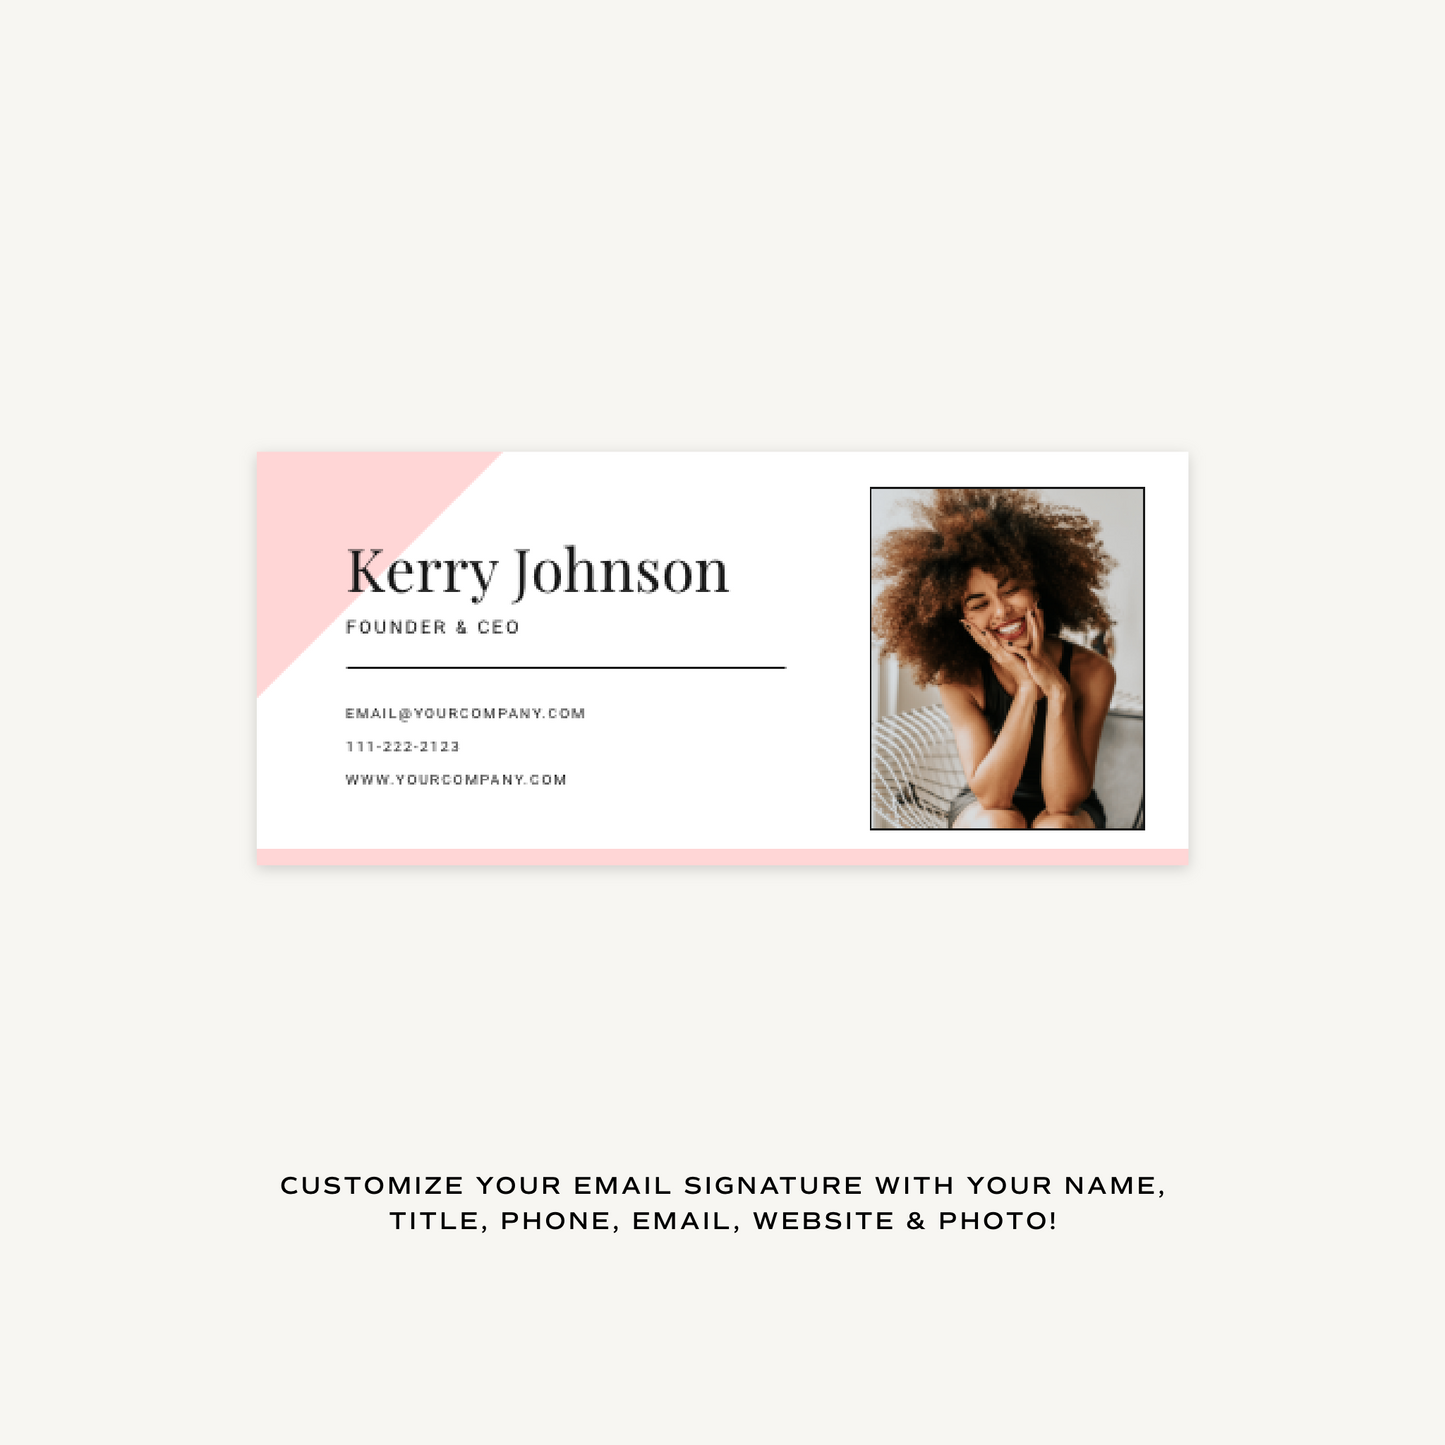 Kerry Email Signature Collection